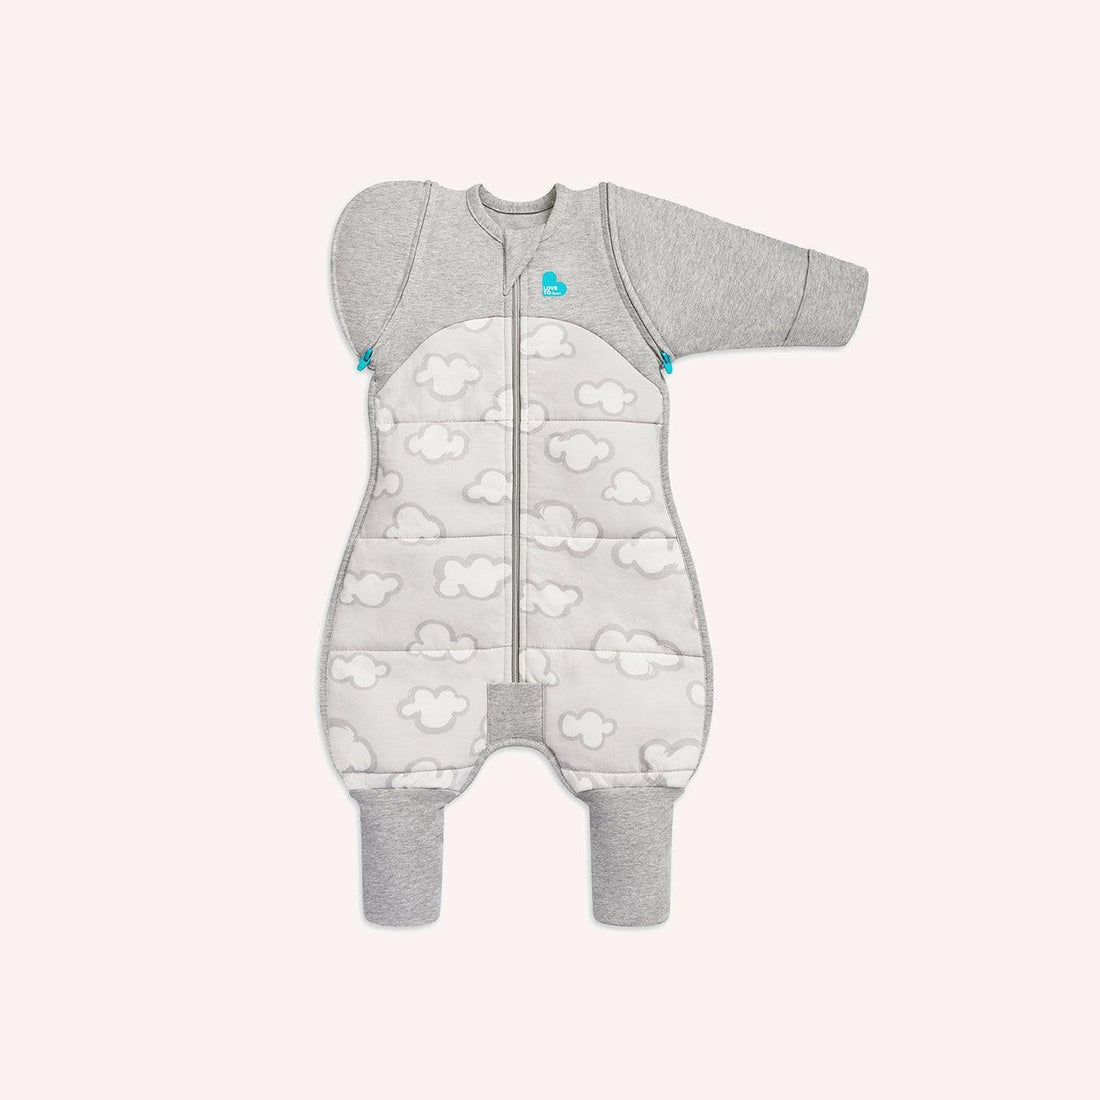 Stage 2 Transition Suit - 2.5 TOG - Grey - Daydream